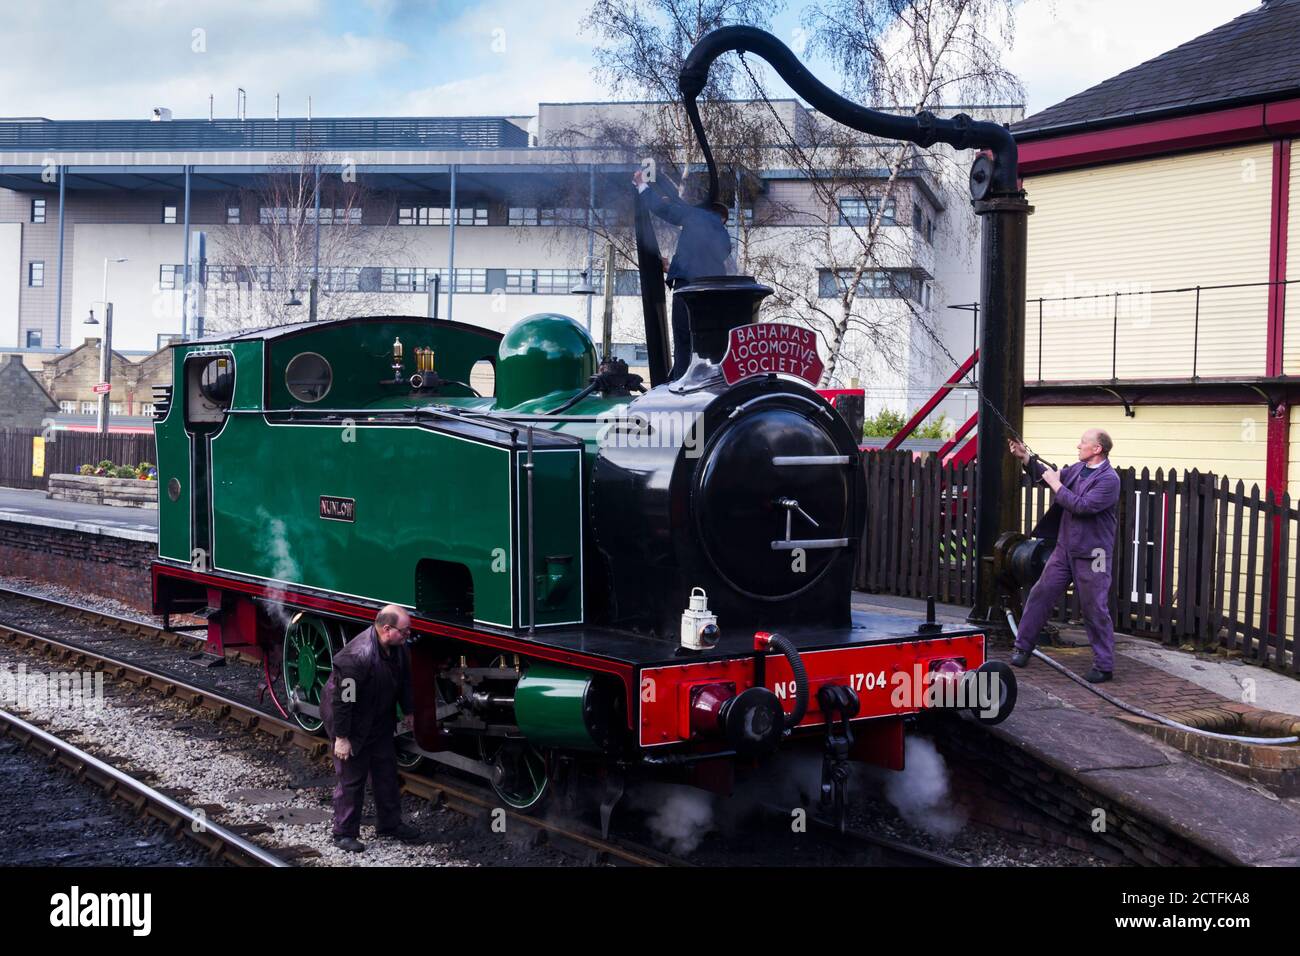 1704, Nunlow, an ex-industrial 0-6-0 side tank engine built by Hudswell Clarke & Co. Ltd of Leeds for G & T Earle Cement manufacturers in 1938. Stock Photo